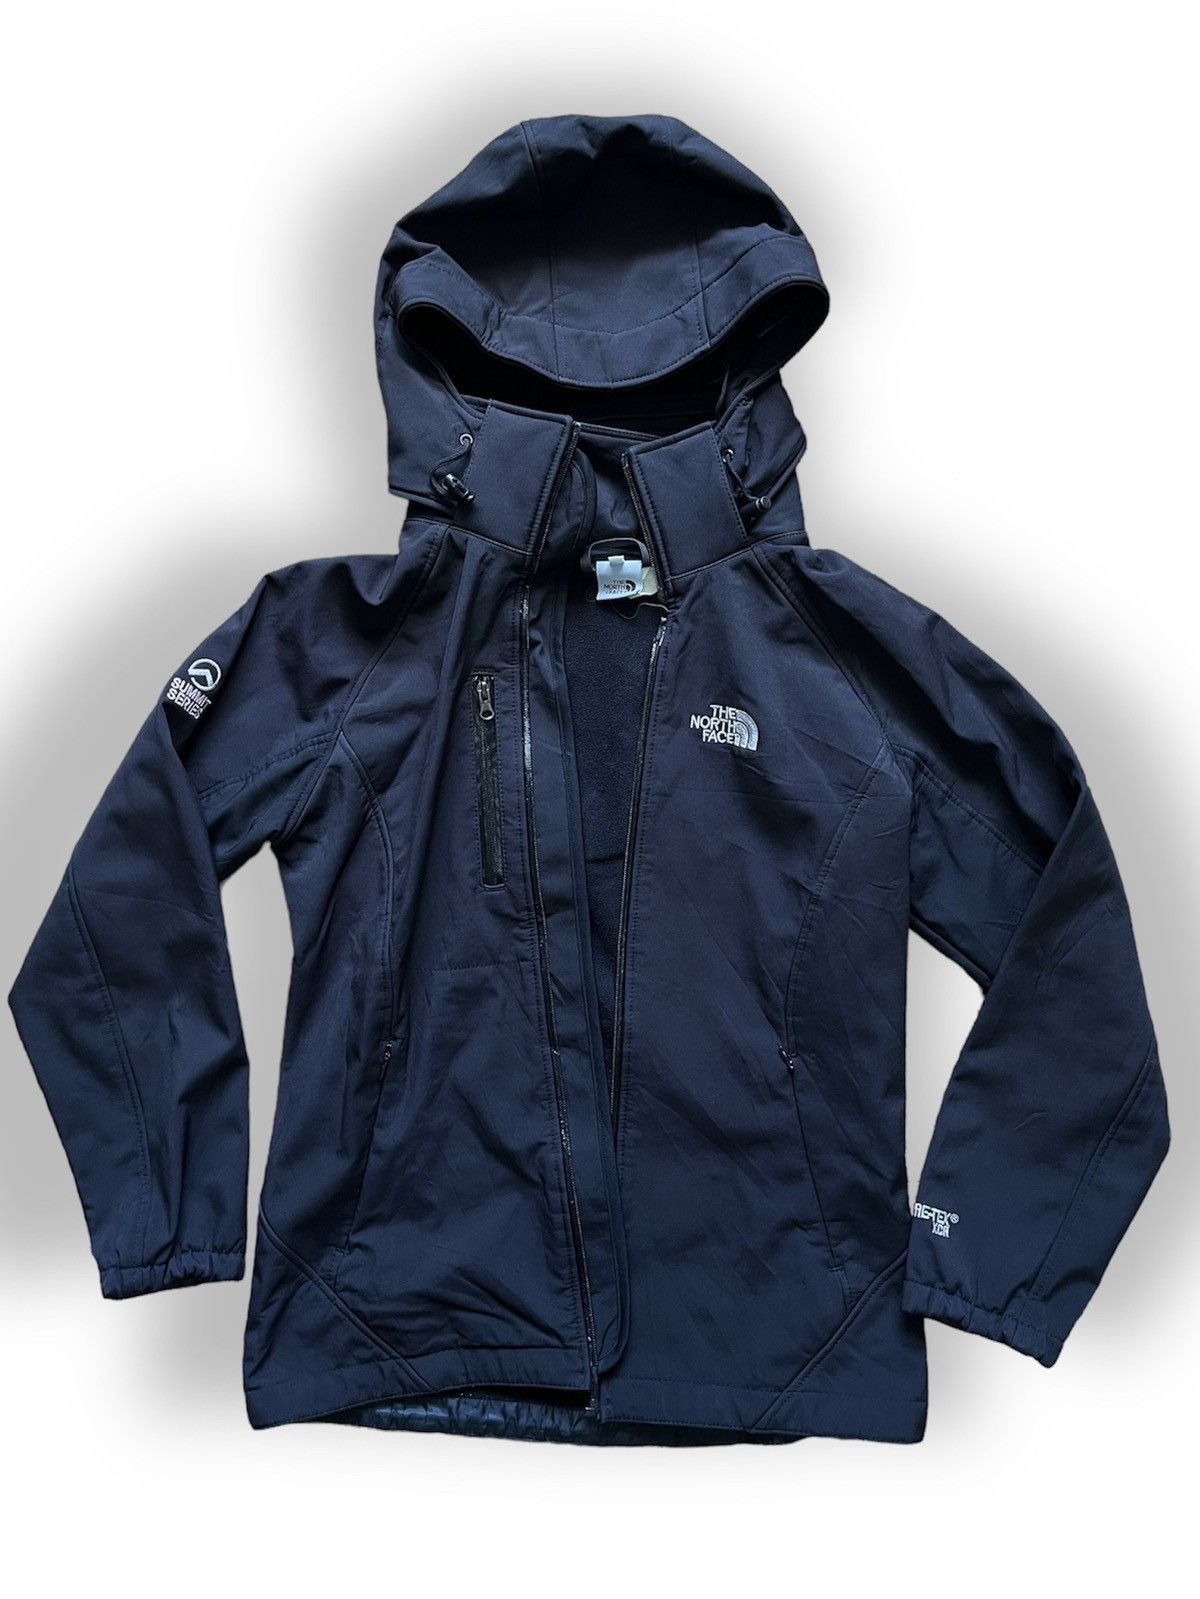 Outdoor Style Go Out! - The North Face X Goretex Summit Series Jacket - 1